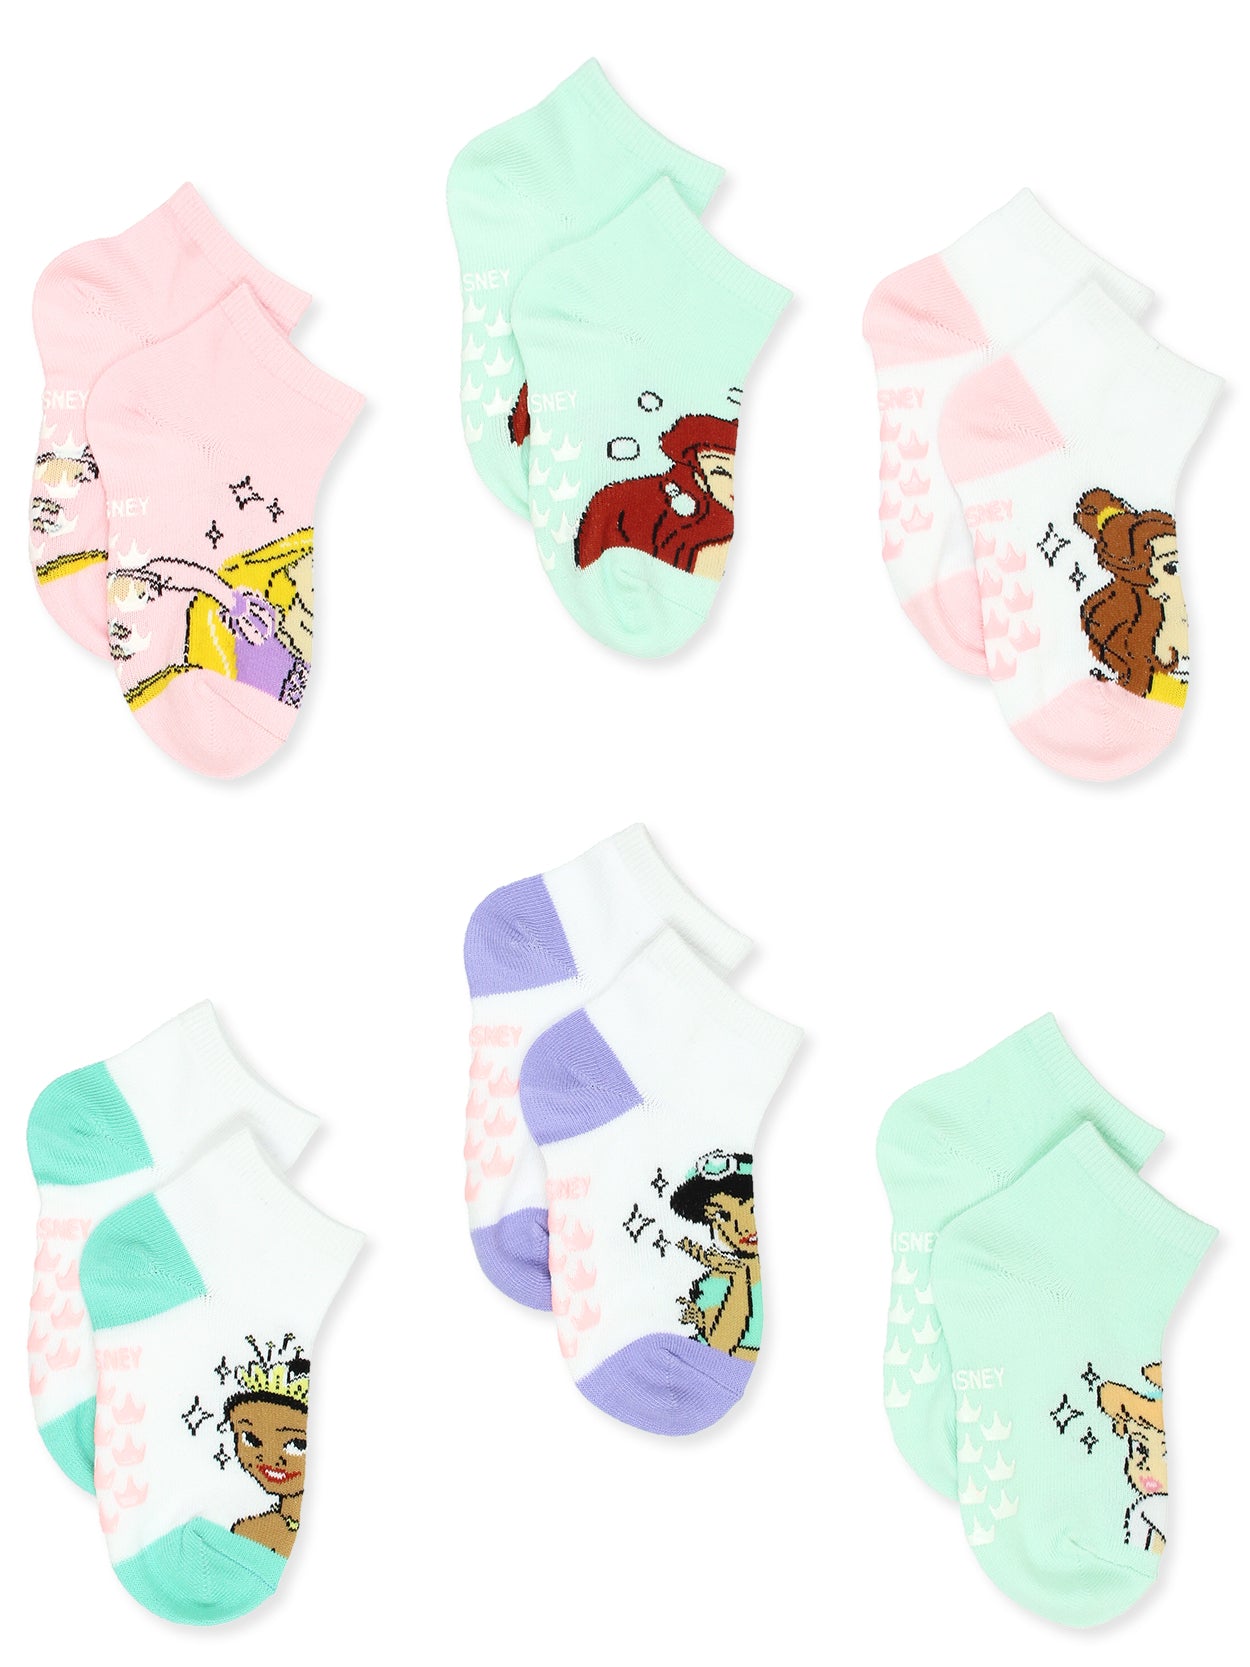 Disney Princess Toddler Girls 6 Pack Socks with Grippers (Small (4-6), Aqua  Blue)